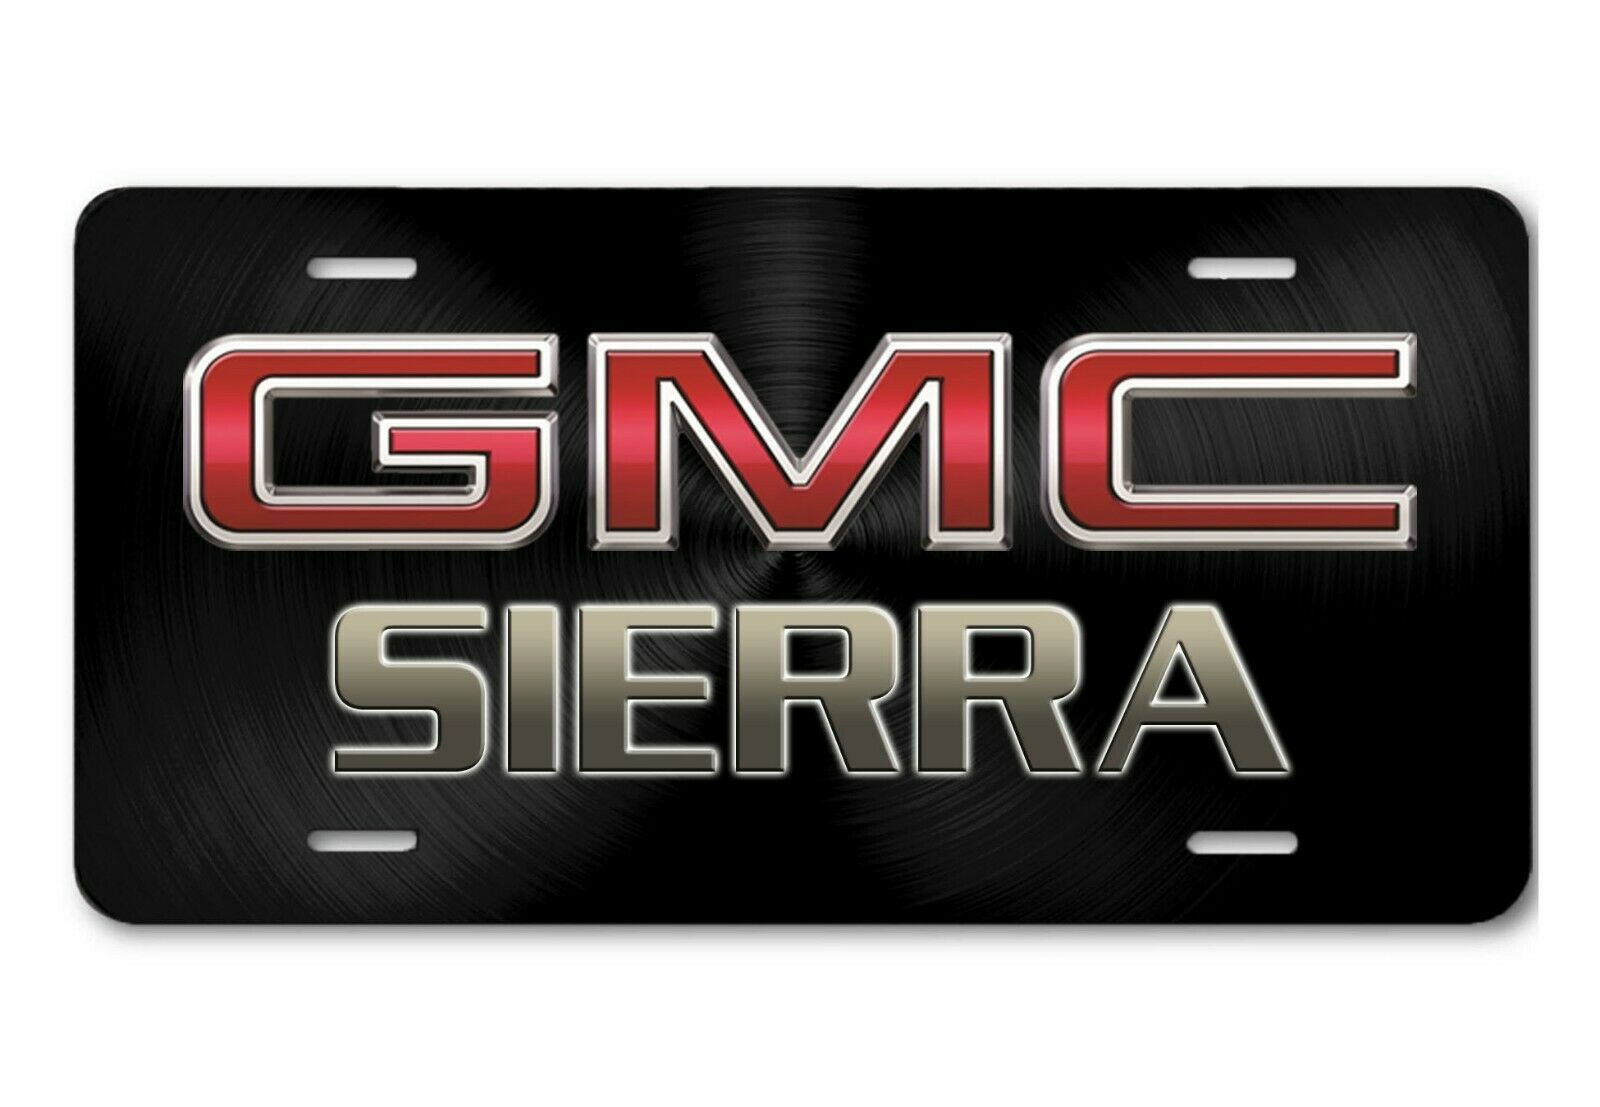 Primary image for GMC Sierra auto art vehicle aluminum license plate car truck  black swirl tag 